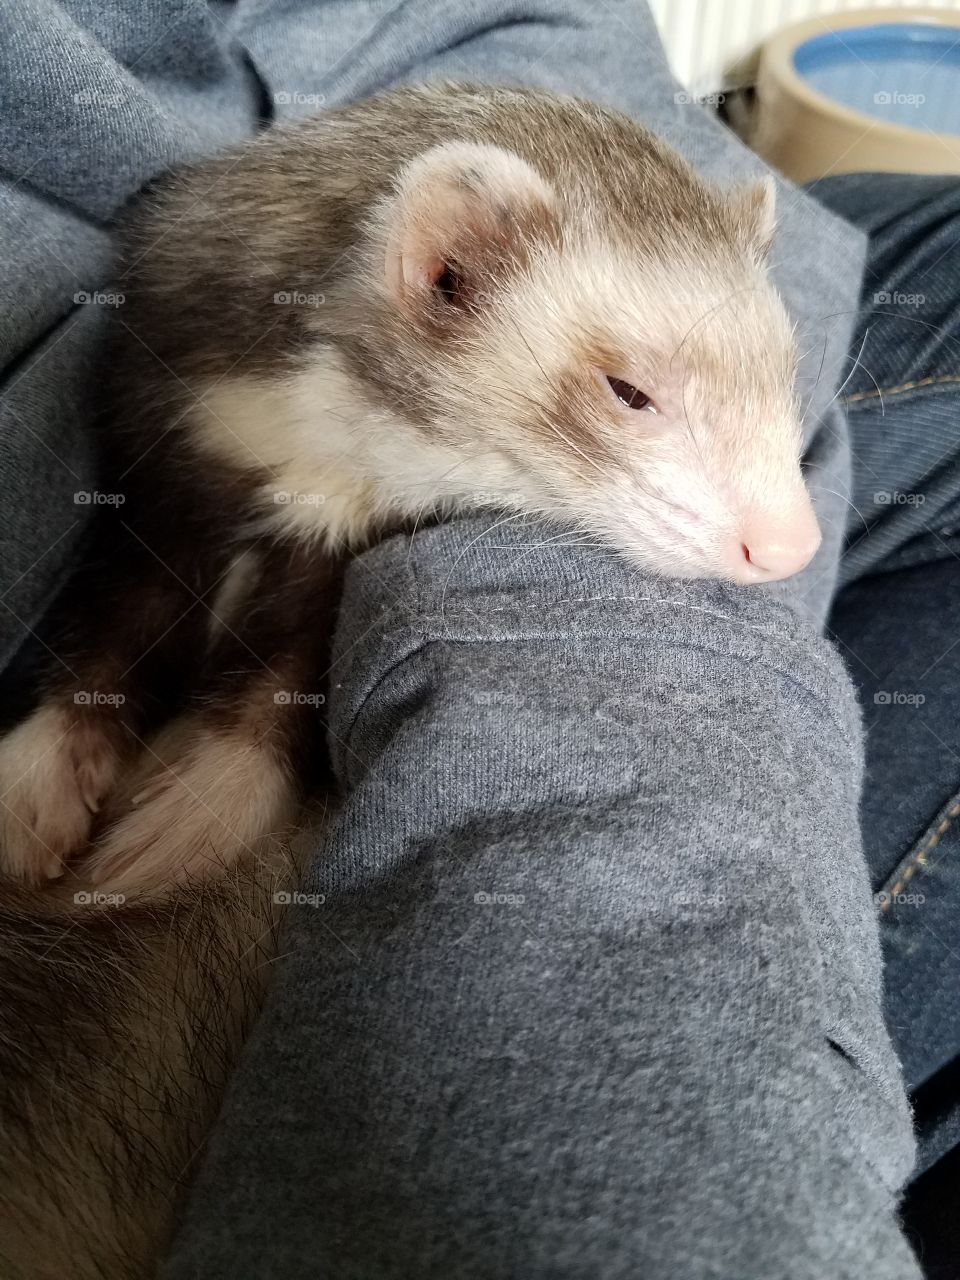 sleepy time with the ferret